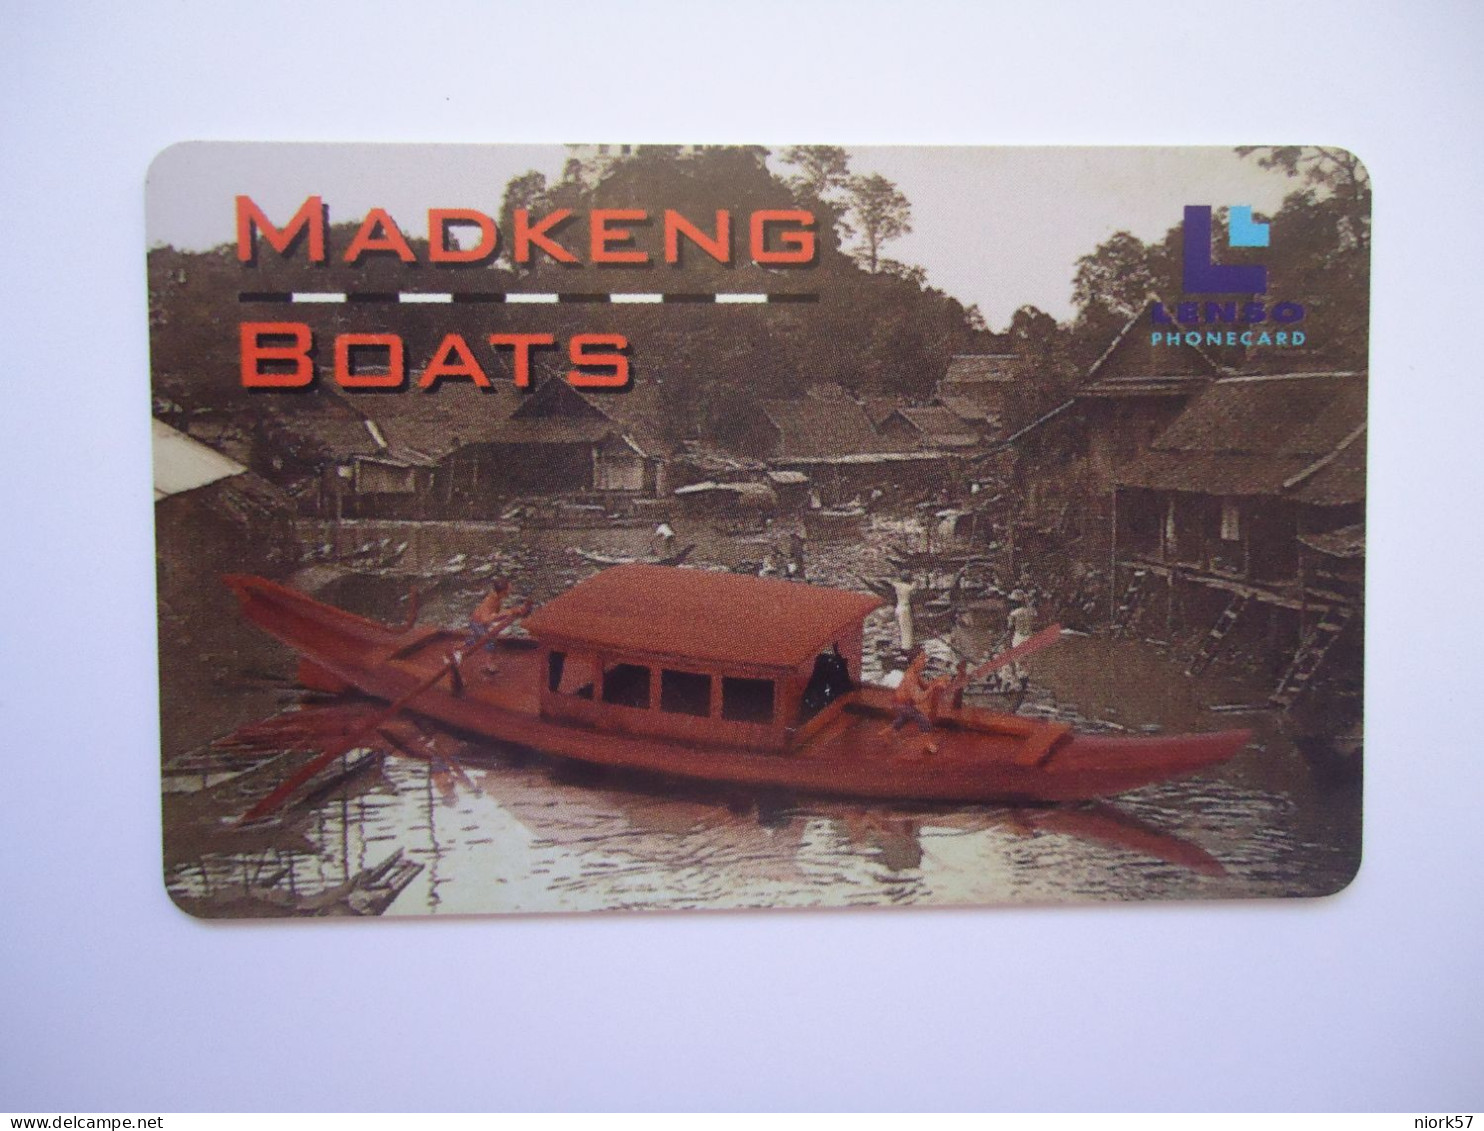 THAILAND CARDS LENSO  USED MARKET BOATS  79/500 - Barcos